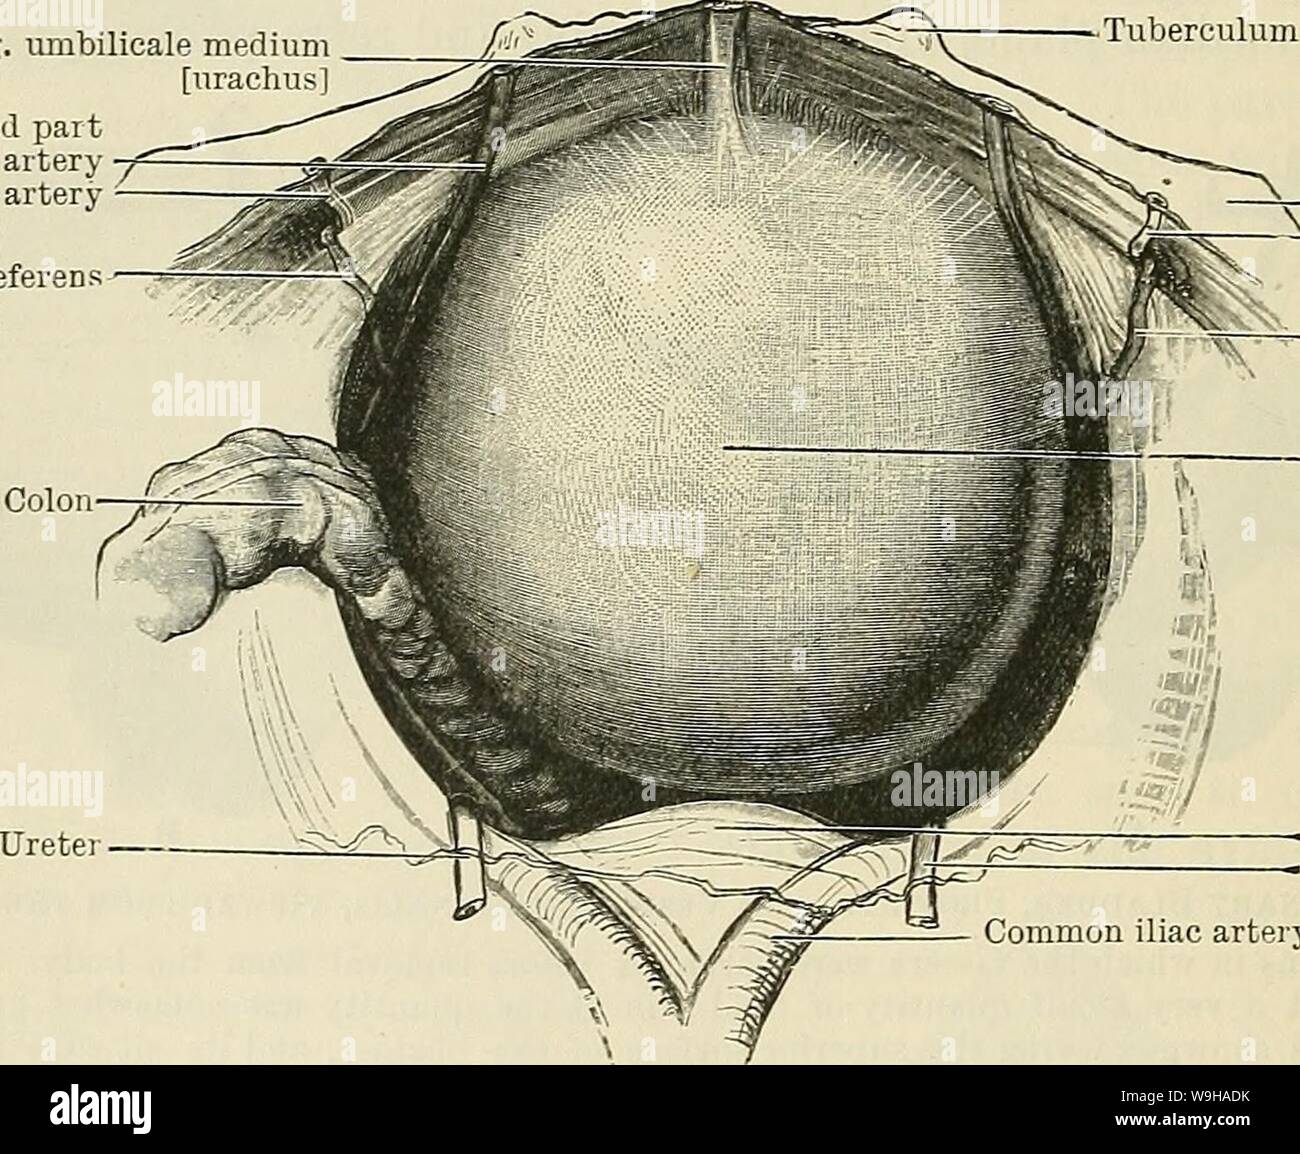 Archive image from page 1309 of Cunningham's Text-book of anatomy (1914). Cunningham's Text-book of anatomy  cunninghamstextb00cunn Year: 1914 ( 1276 THE UKINO-GENITAL SYSTEM. of the bladder, or points where the ureters join the organ. They separate the superior surface from the infero-lateral portions of the inferior aspect of the bladder wall (Fig. 993, A). The posterior border stretches across between the lateral angles of the bladder, and separates the superior from the basal surface of the viscus. The superior surface is related in the male to coils of intestine; in the female it is also Stock Photo